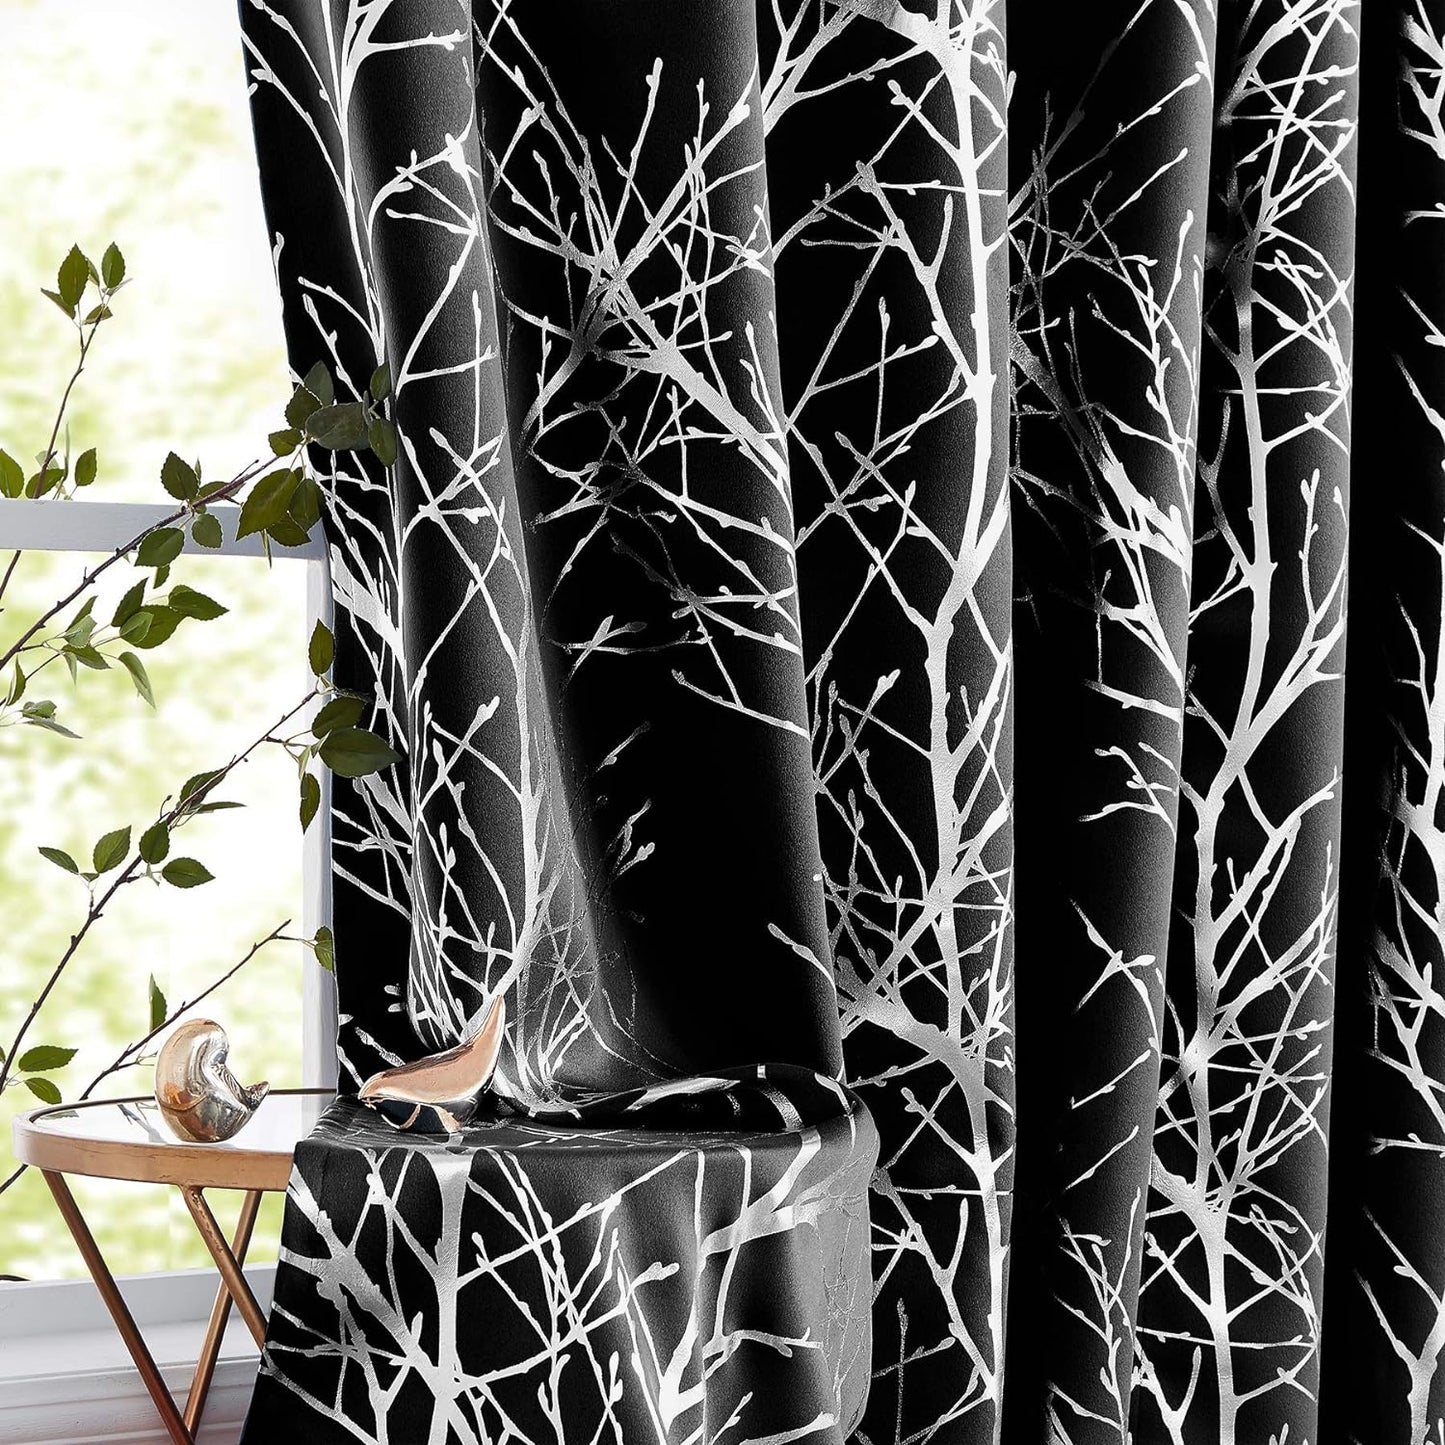 FMFUNCTEX Metallic Tree Blackout Curtains Bedroom Grey 84-Inch Living-Room Branch Print Curtain Panels Forest Triple Weave Thermal Insulated Drapes for Windows Dorm Hotel Grommet Top, 2Panels  Fmfunctex Silver /Black 50"W X 84"L 2Pcs 